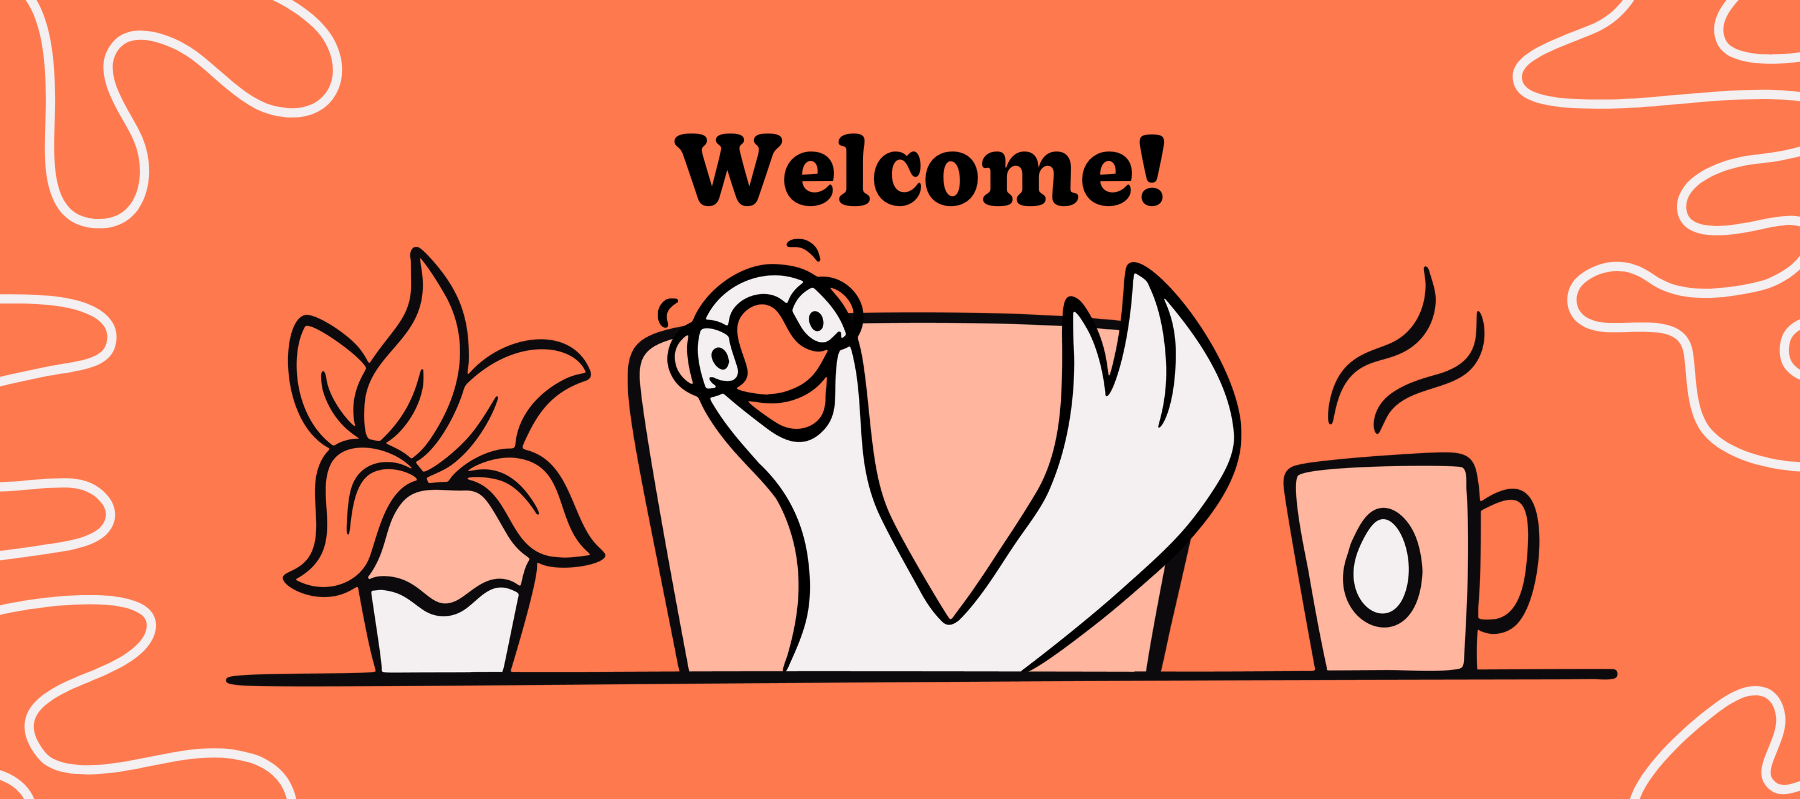 New to the flock? Check out these resources to help get you started